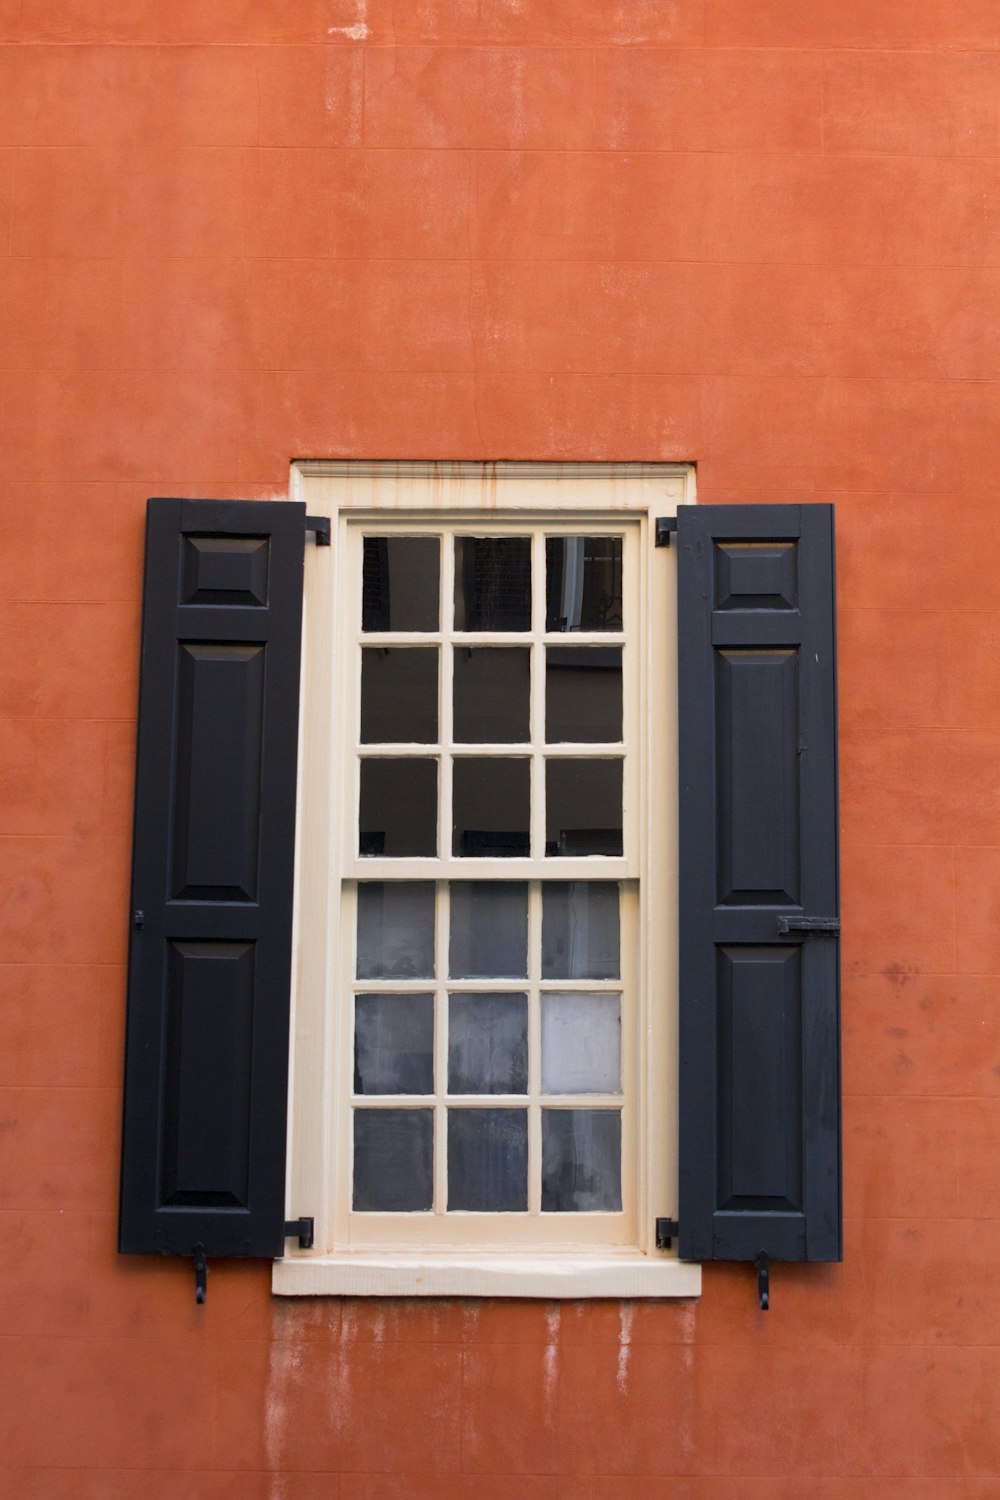 a window with black shutters on a red wall